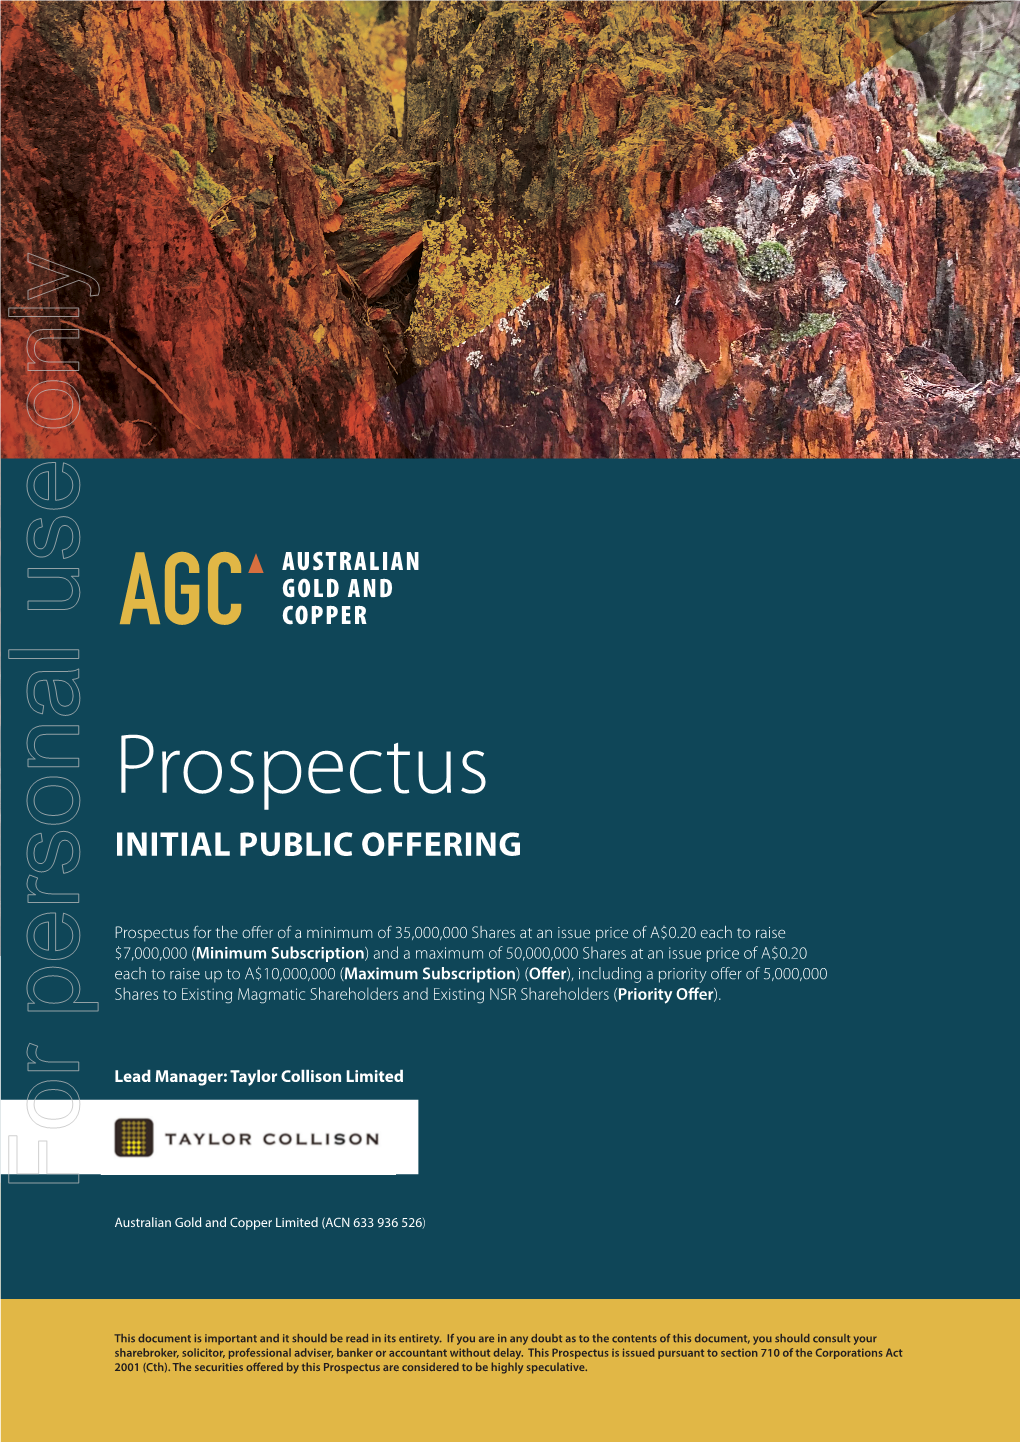 Australian Gold and Copper Limited (ACN 633 936 526)